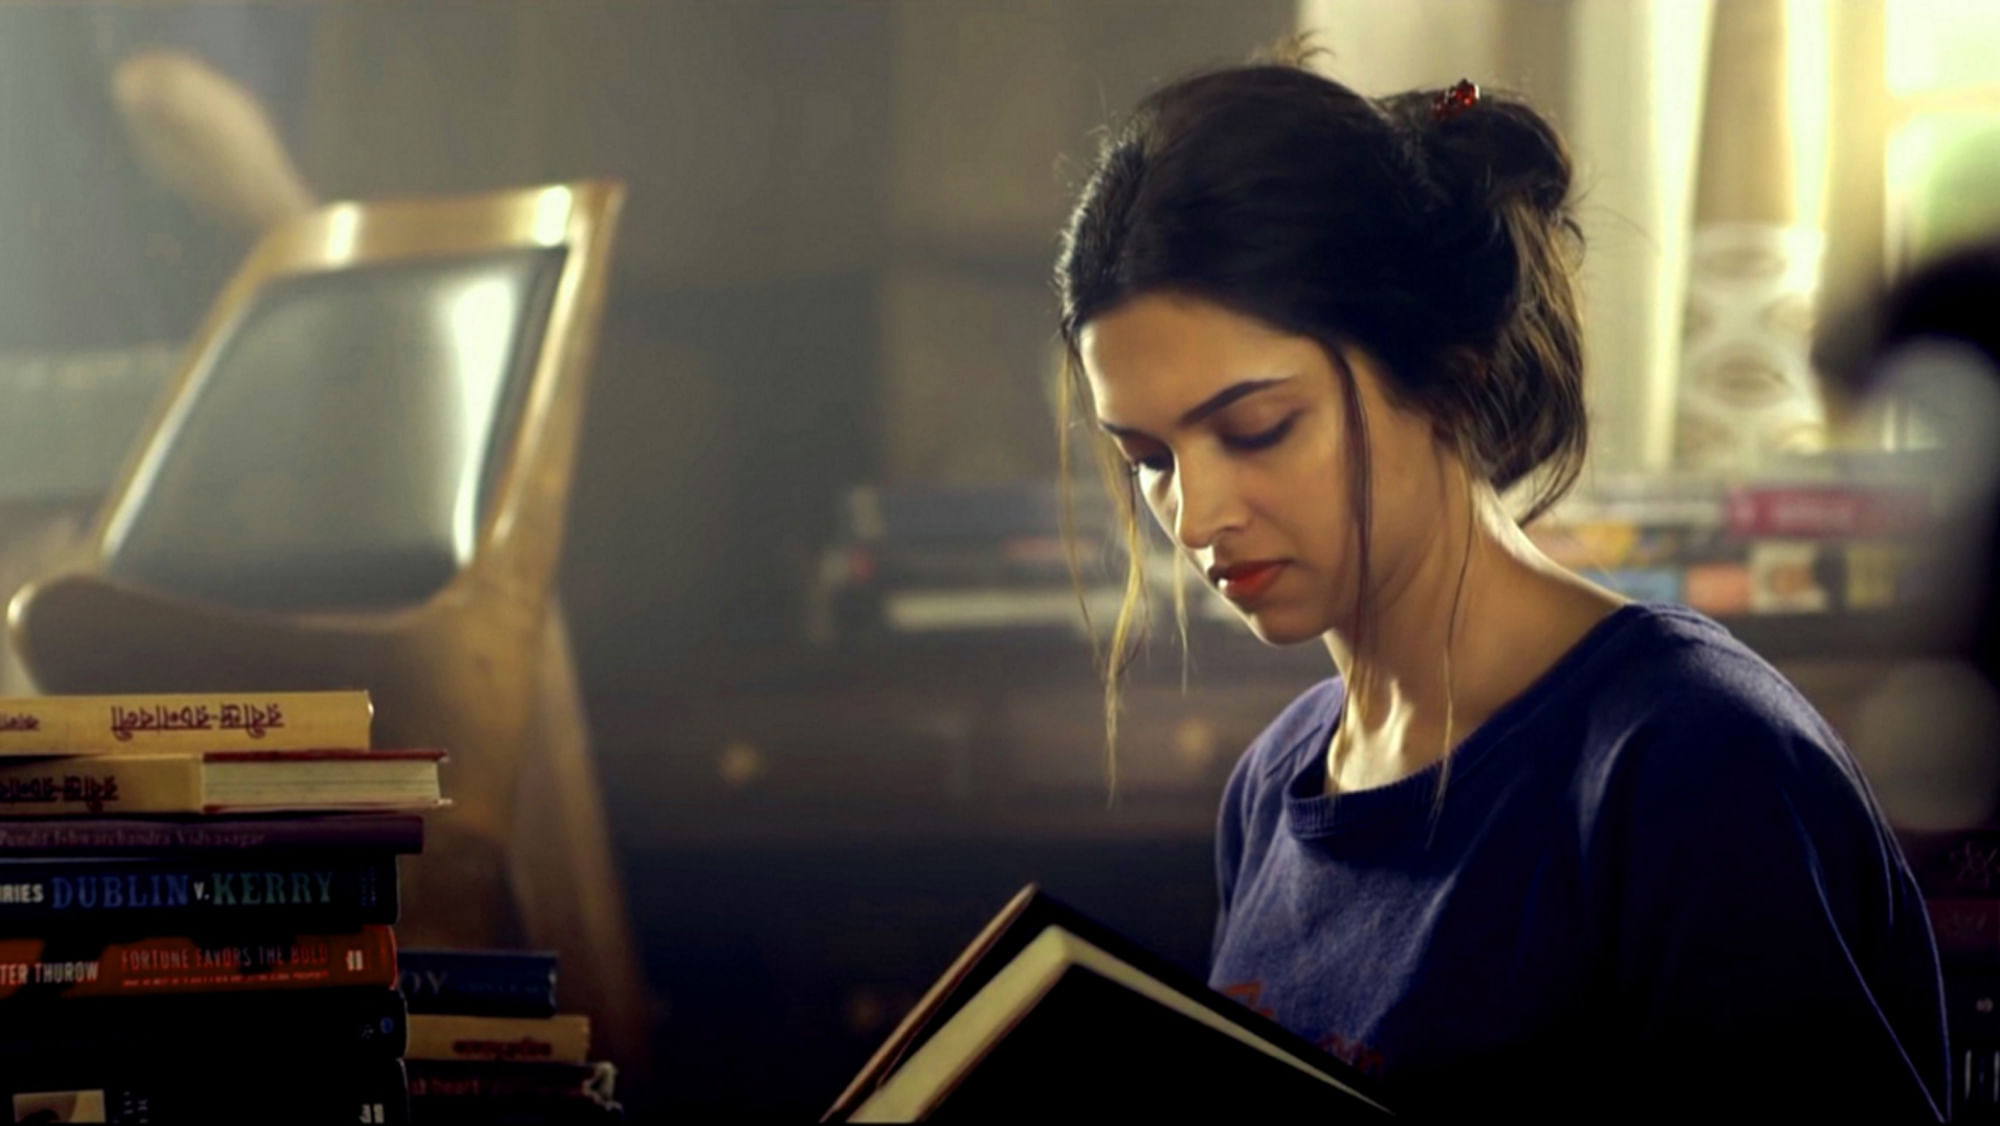 There are certain books you can read which will change you forever. (Photo Courtesy: Piku/YouTube screengrab)